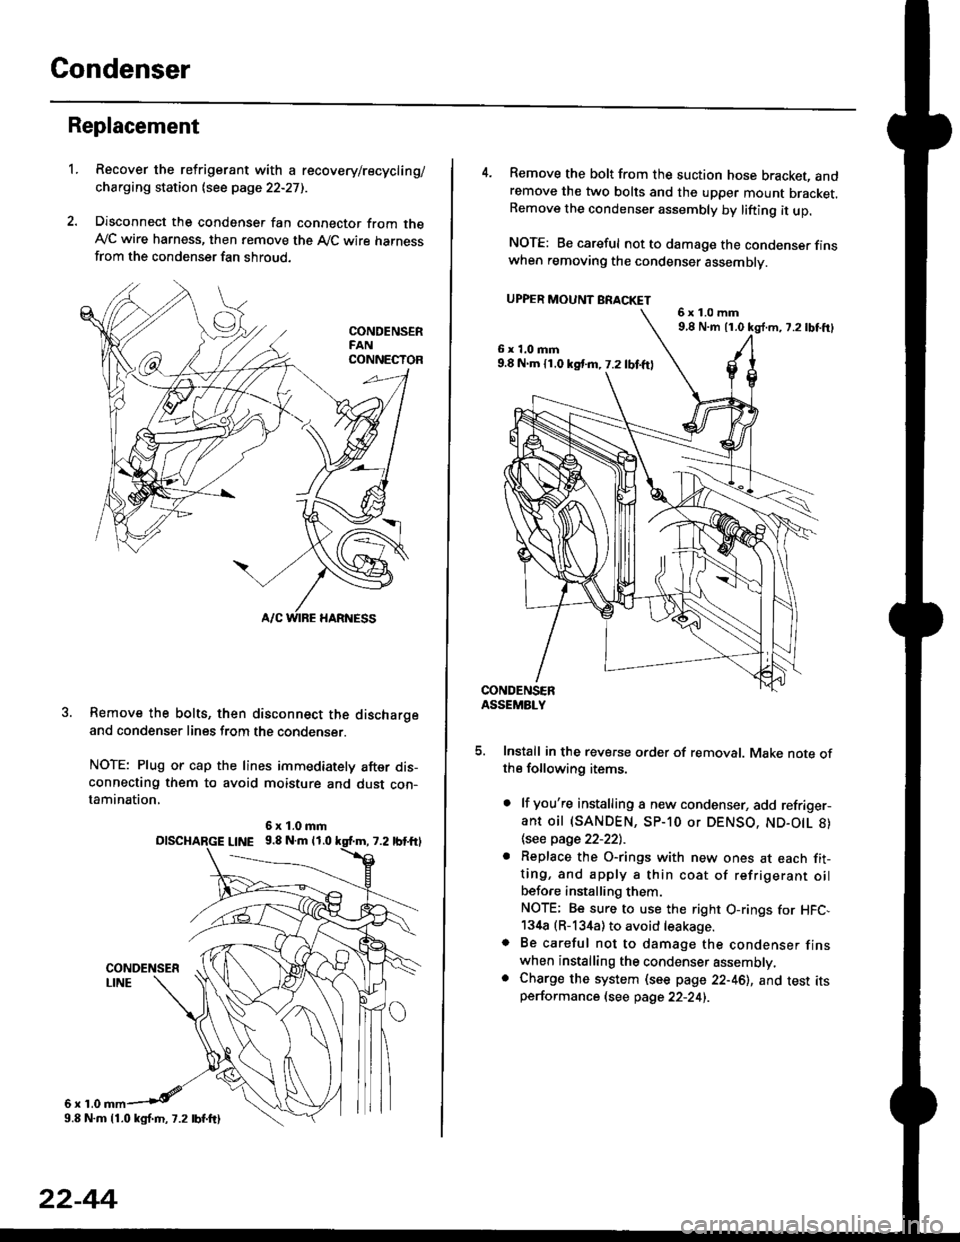 HONDA CIVIC 1999 6.G Workshop Manual Condenser
Replacement
1.Recover the refrigerant with a recovery/recycling/
charging station lsee page 22-271.
Disconnect the condenser fan connector from theAyC wire harness, then remove the A,/C wir